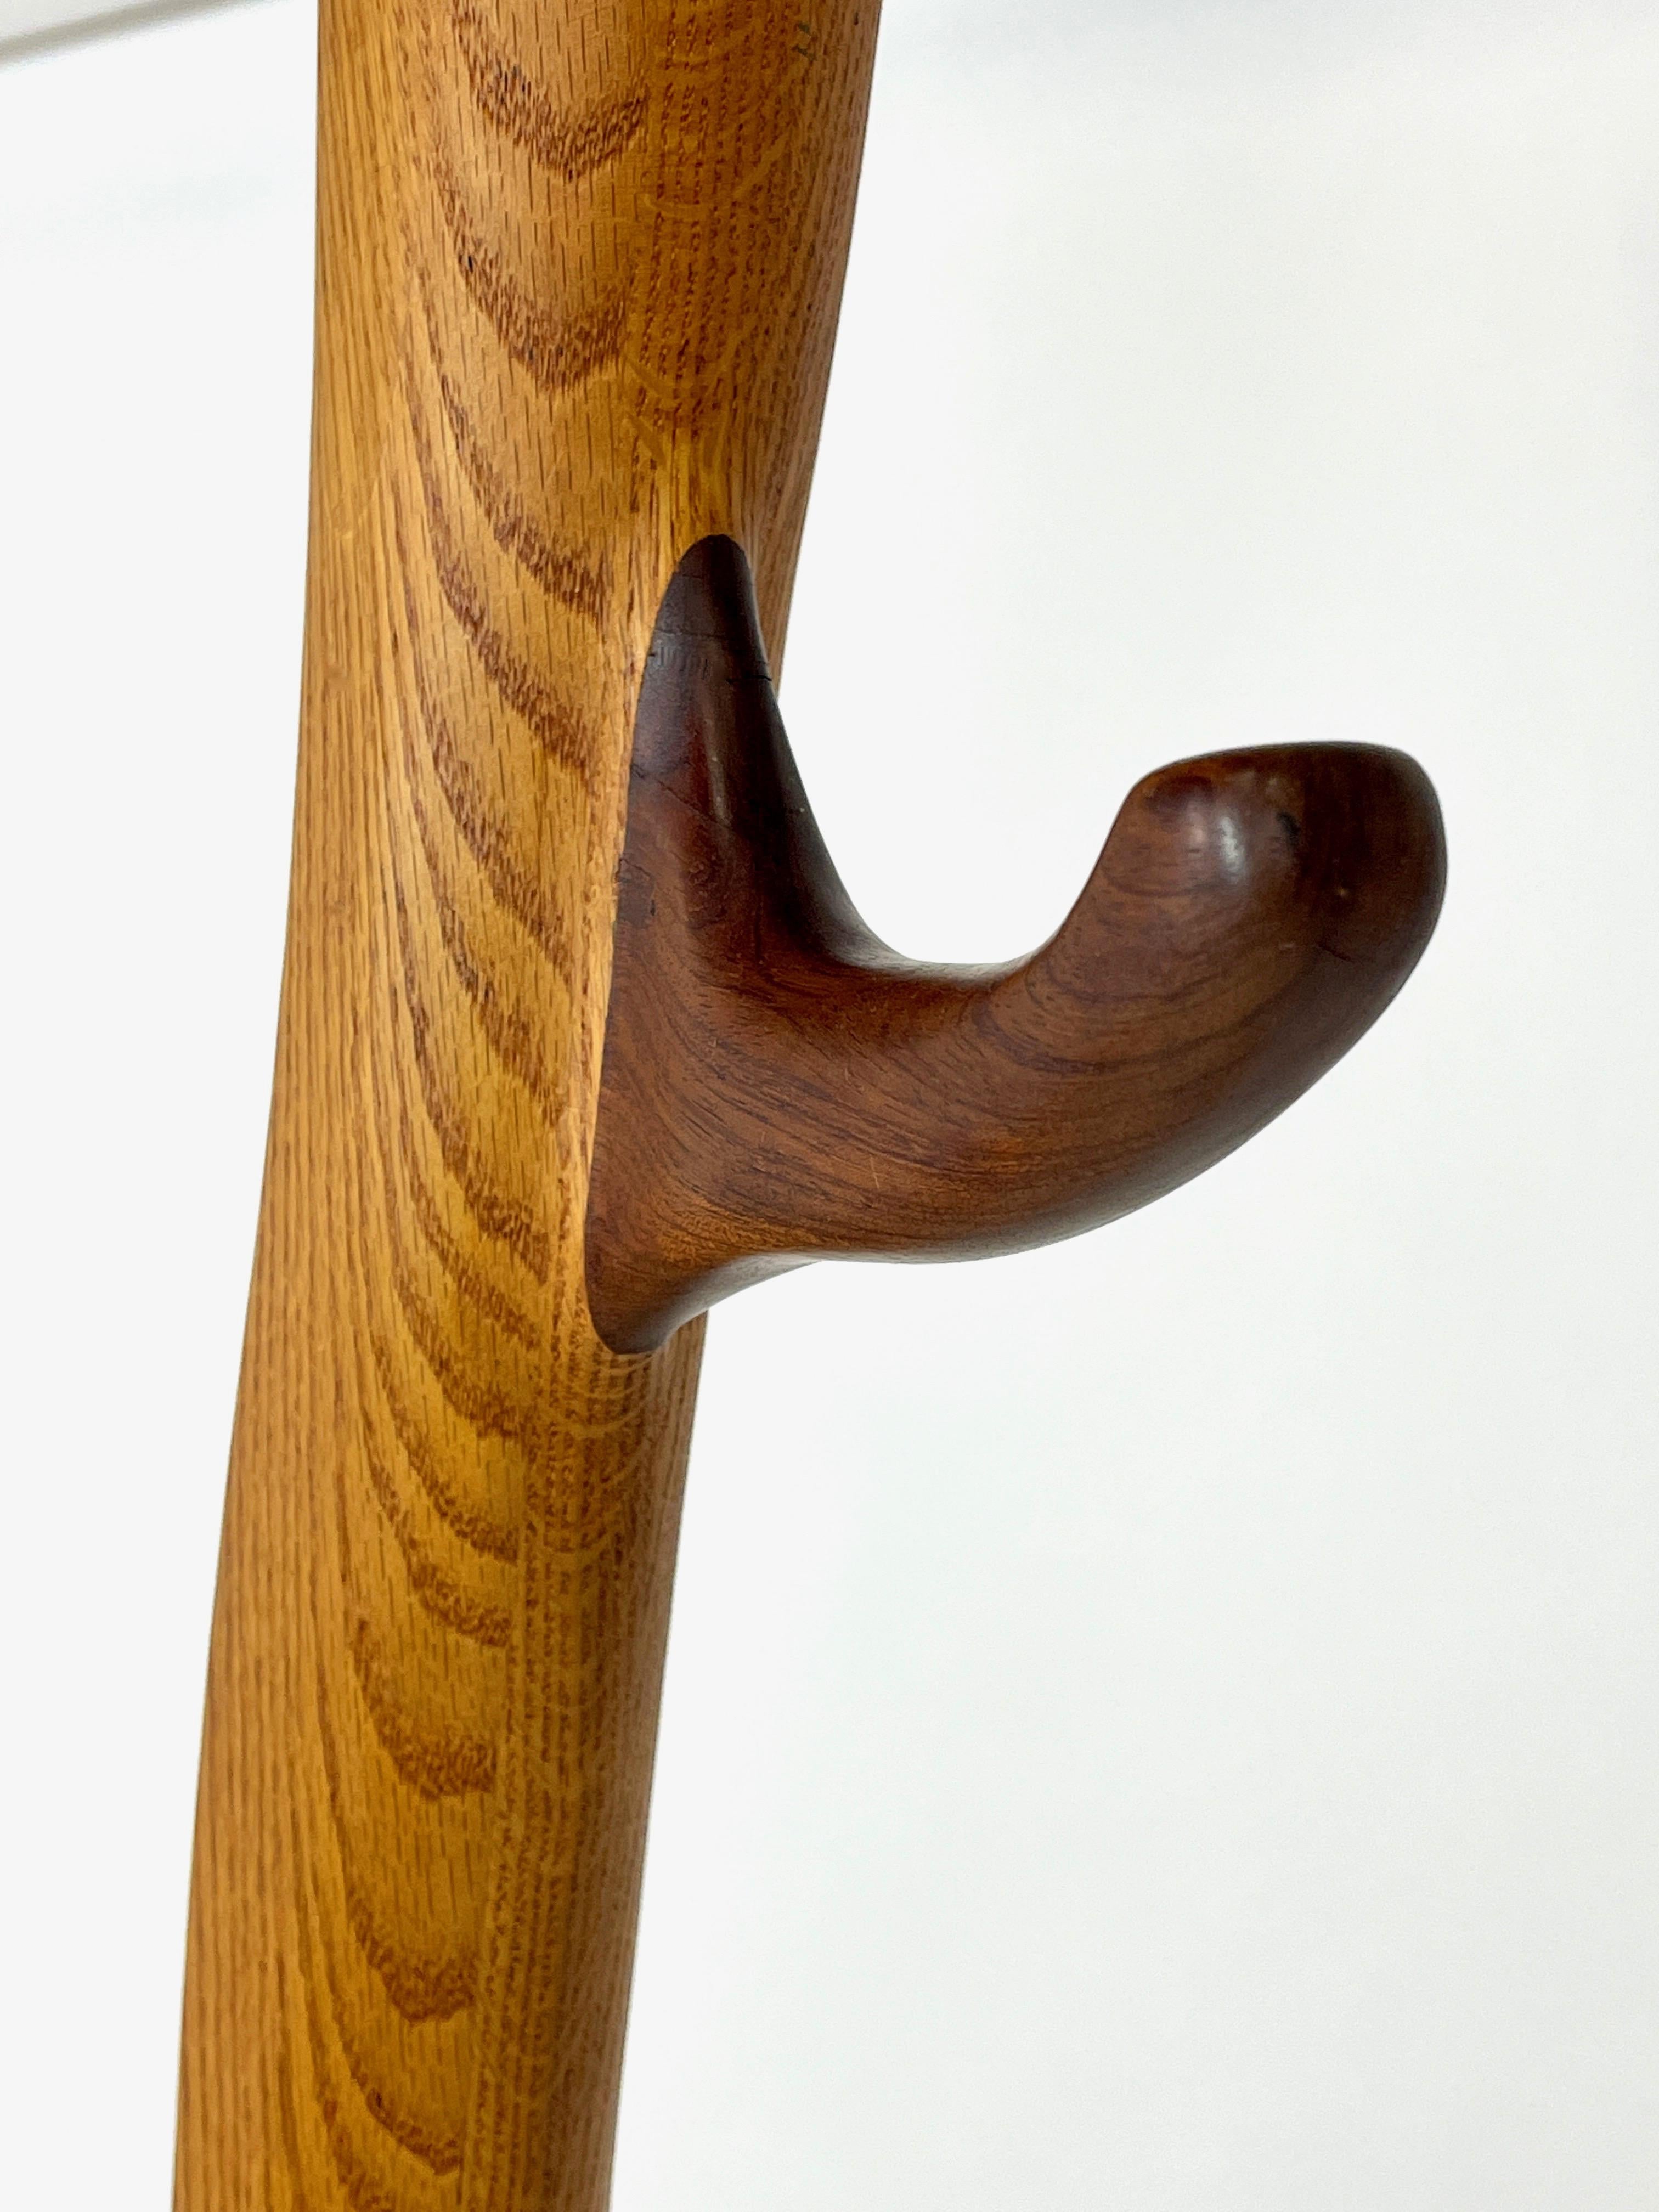 Large and sculptural handcrafted coat hanger sculpture constructed of solid oak with rosewood detail. This piece is incredibly heavy and absolutely stunning in person. Form meets function at it's best. Maker unknown.